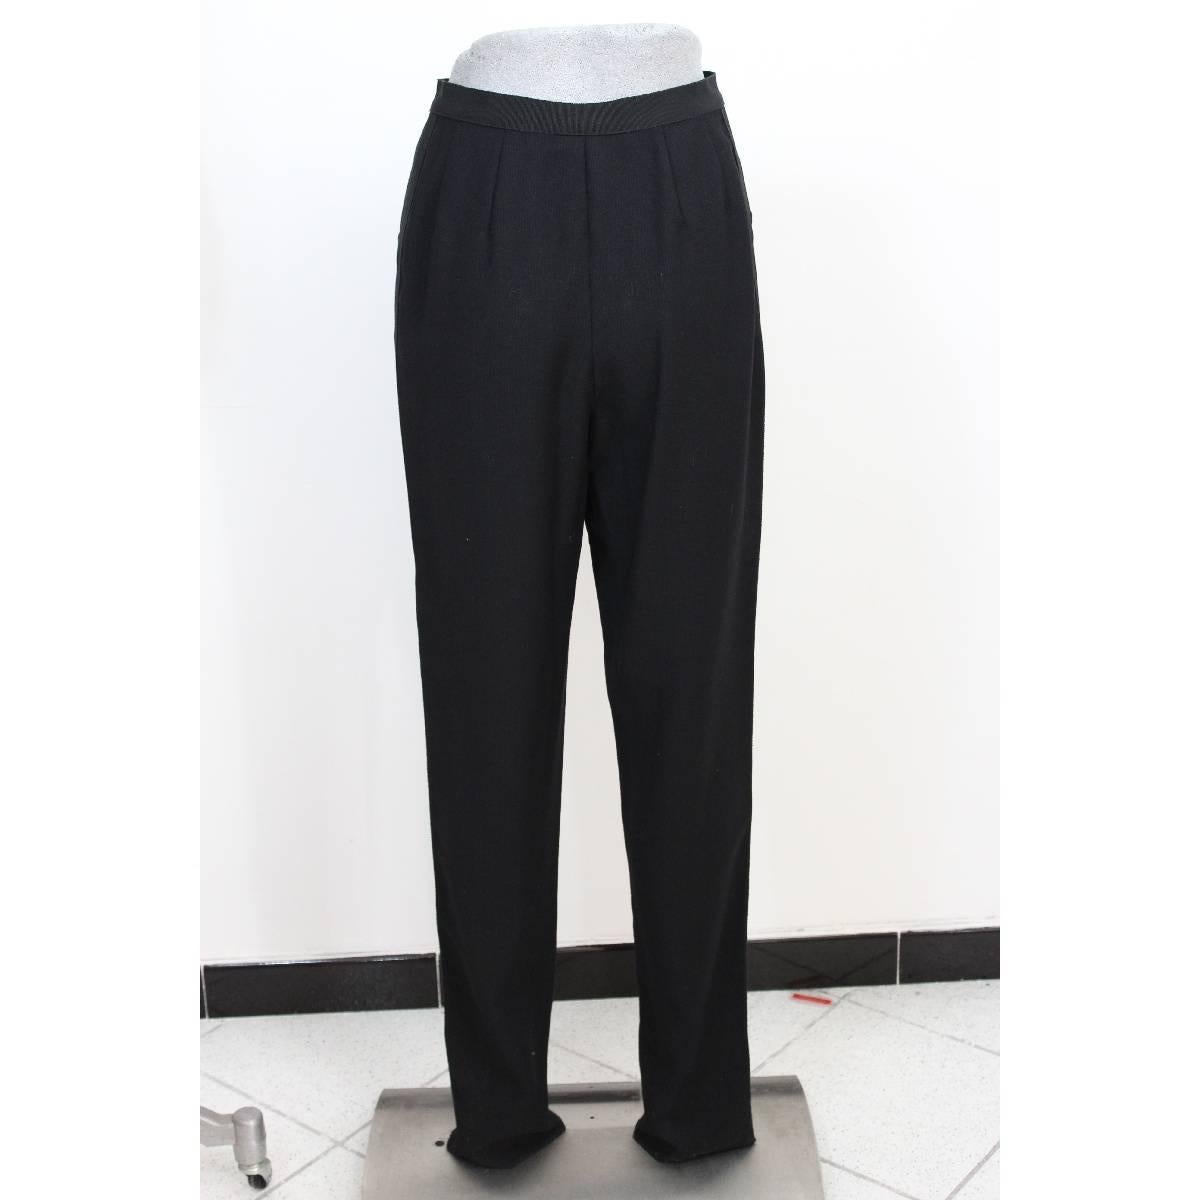 Women's Valentino suit pants black wool jacket trouser size 42 it made italy 1990s NWT